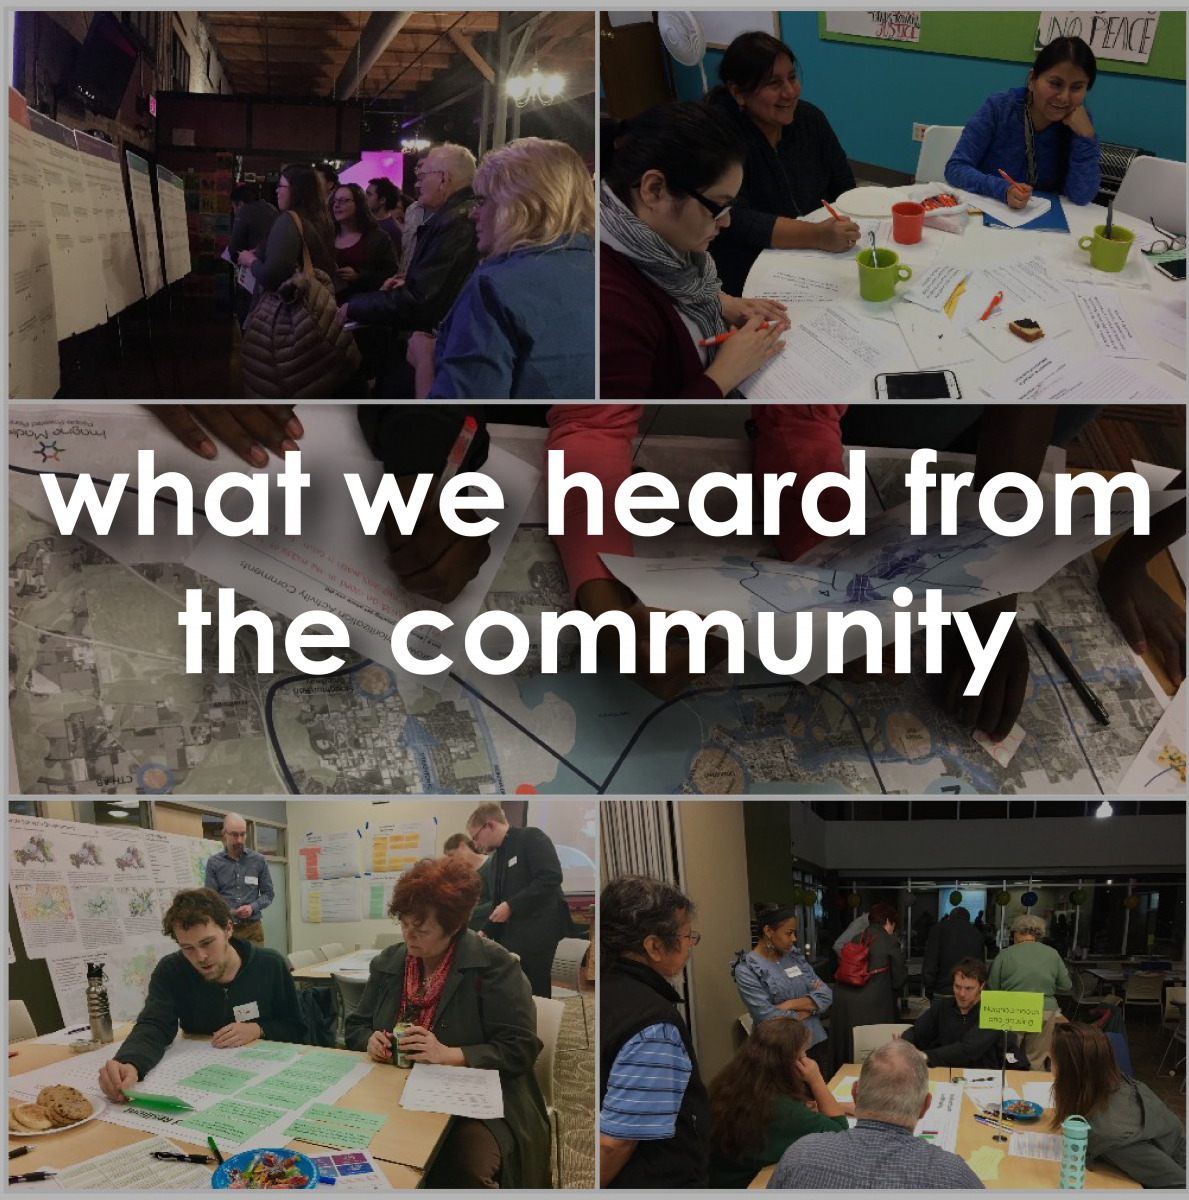 Image of community engagement - What we heard from the community